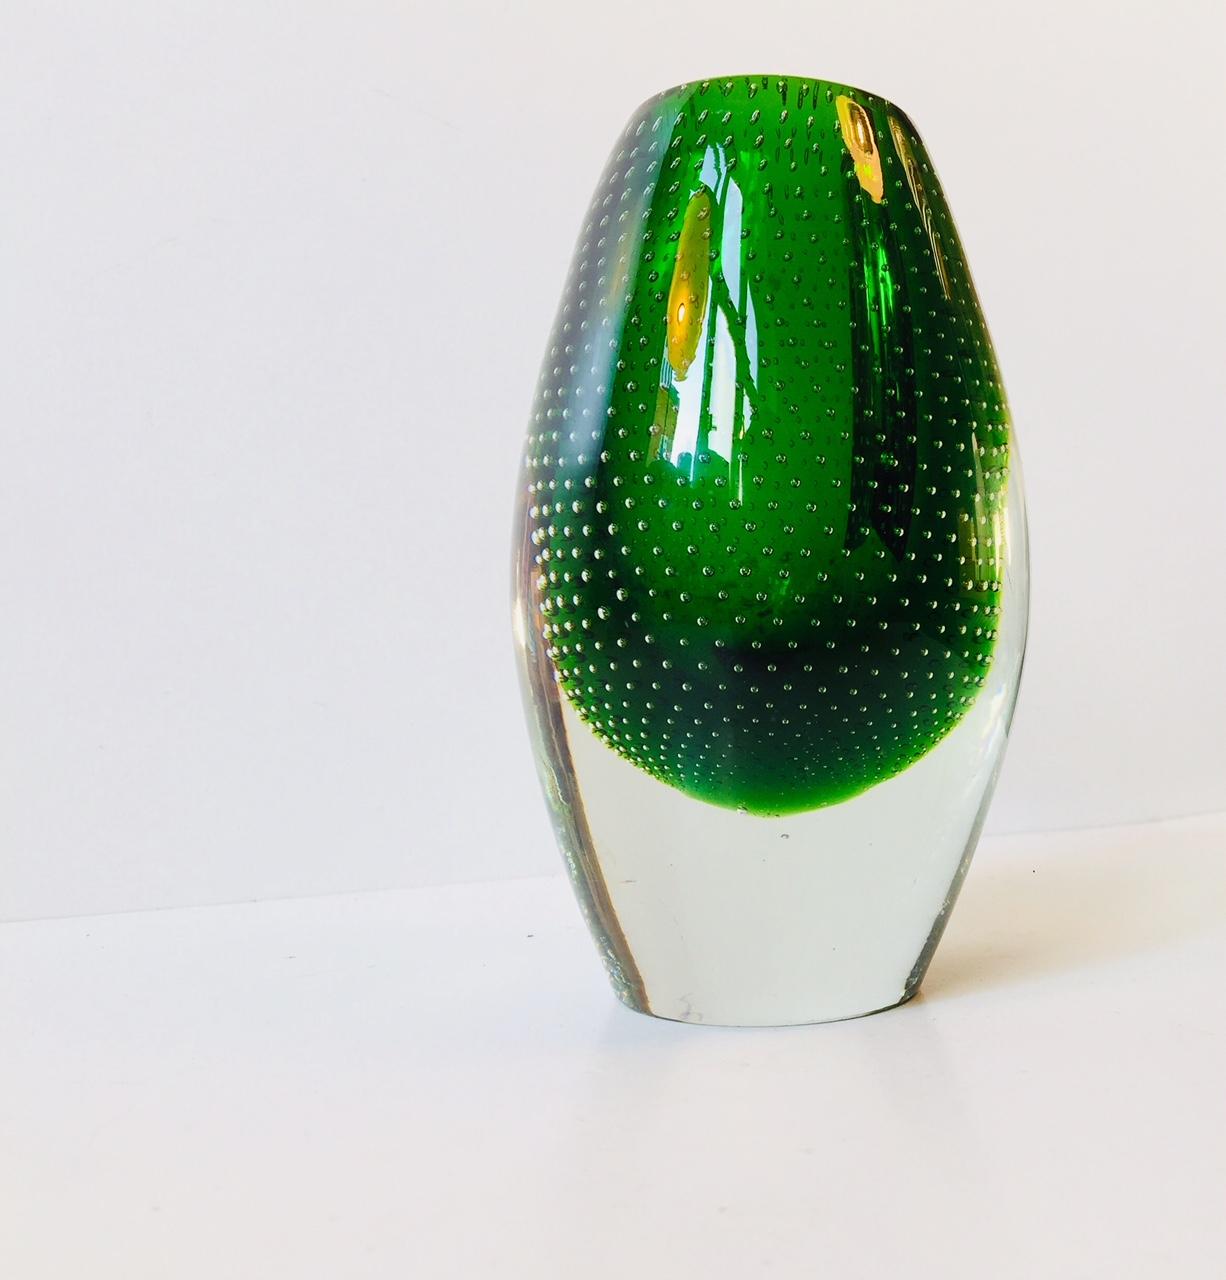 This green signature vase was designed by Finnish designer Gunnel Nyman. It is made of hand blown clear and green glass with air bubbles created using a syringe. It was manufactured at Nuutajarvi Lasi Oy during the late 1940s. The vase is not